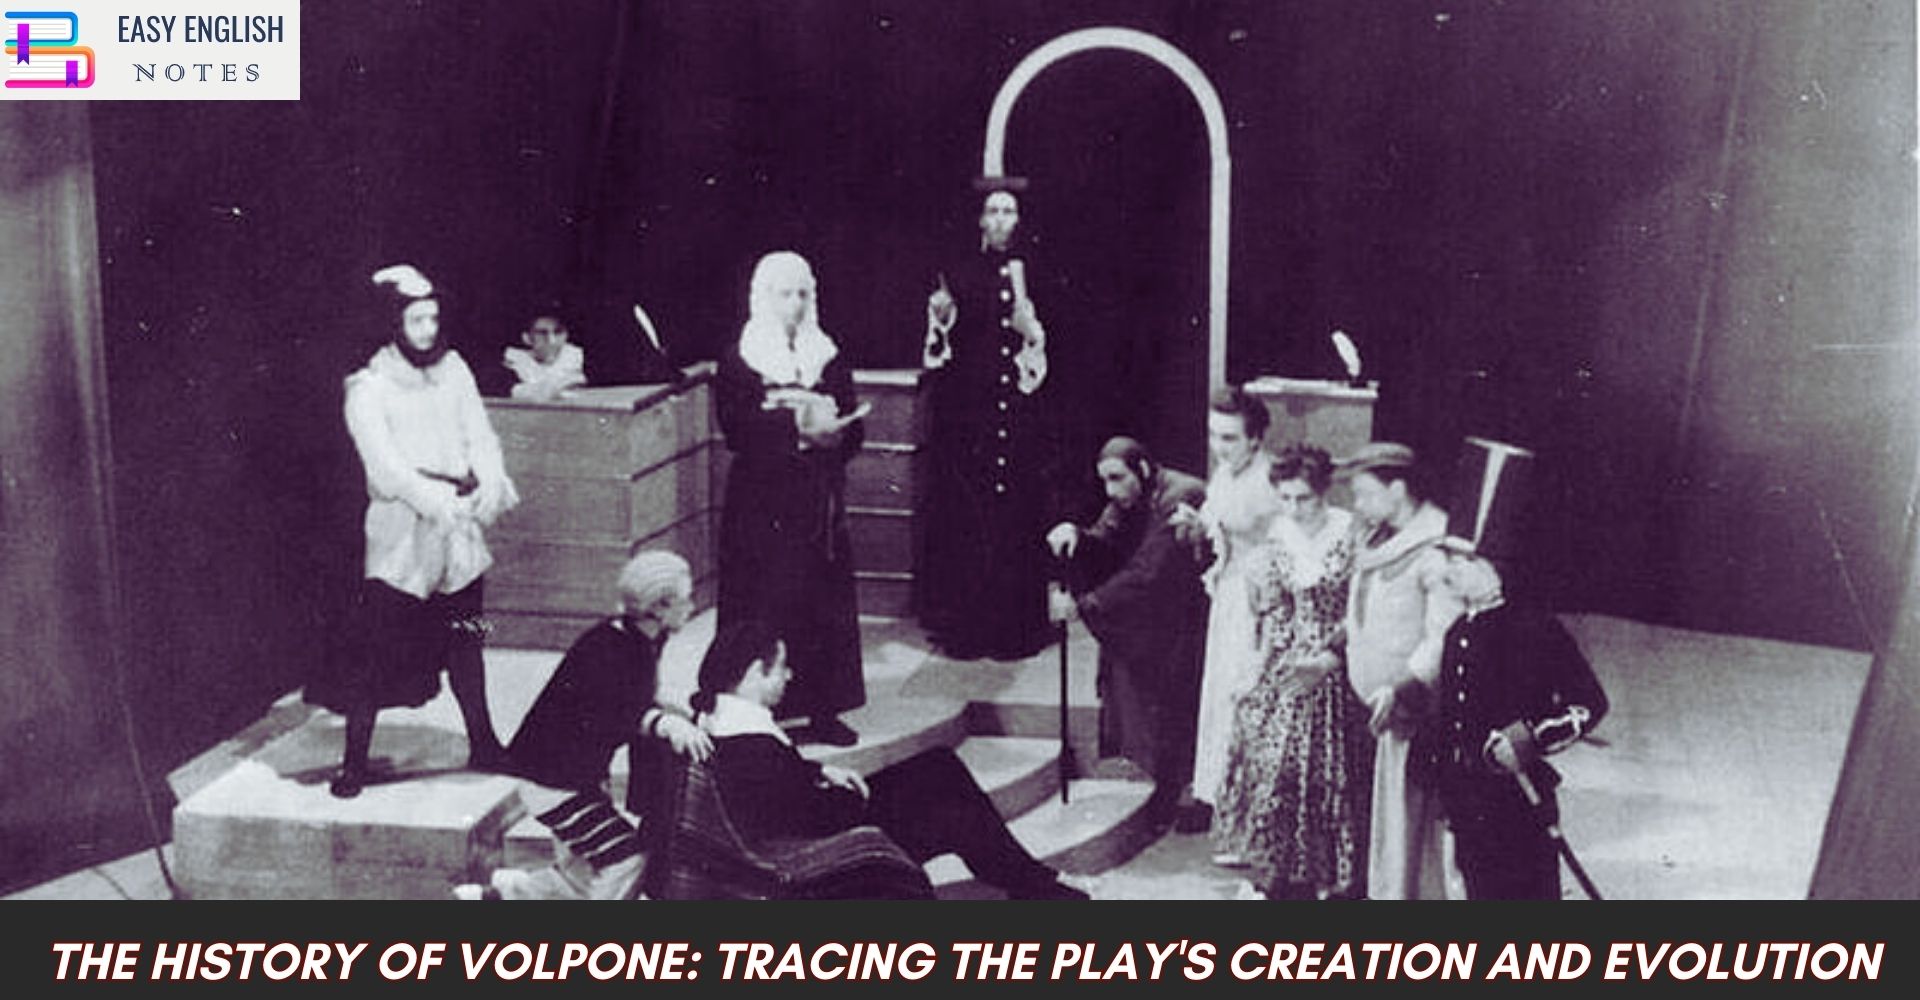 The History of Volpone: Tracing the Play's Creation and Evolution